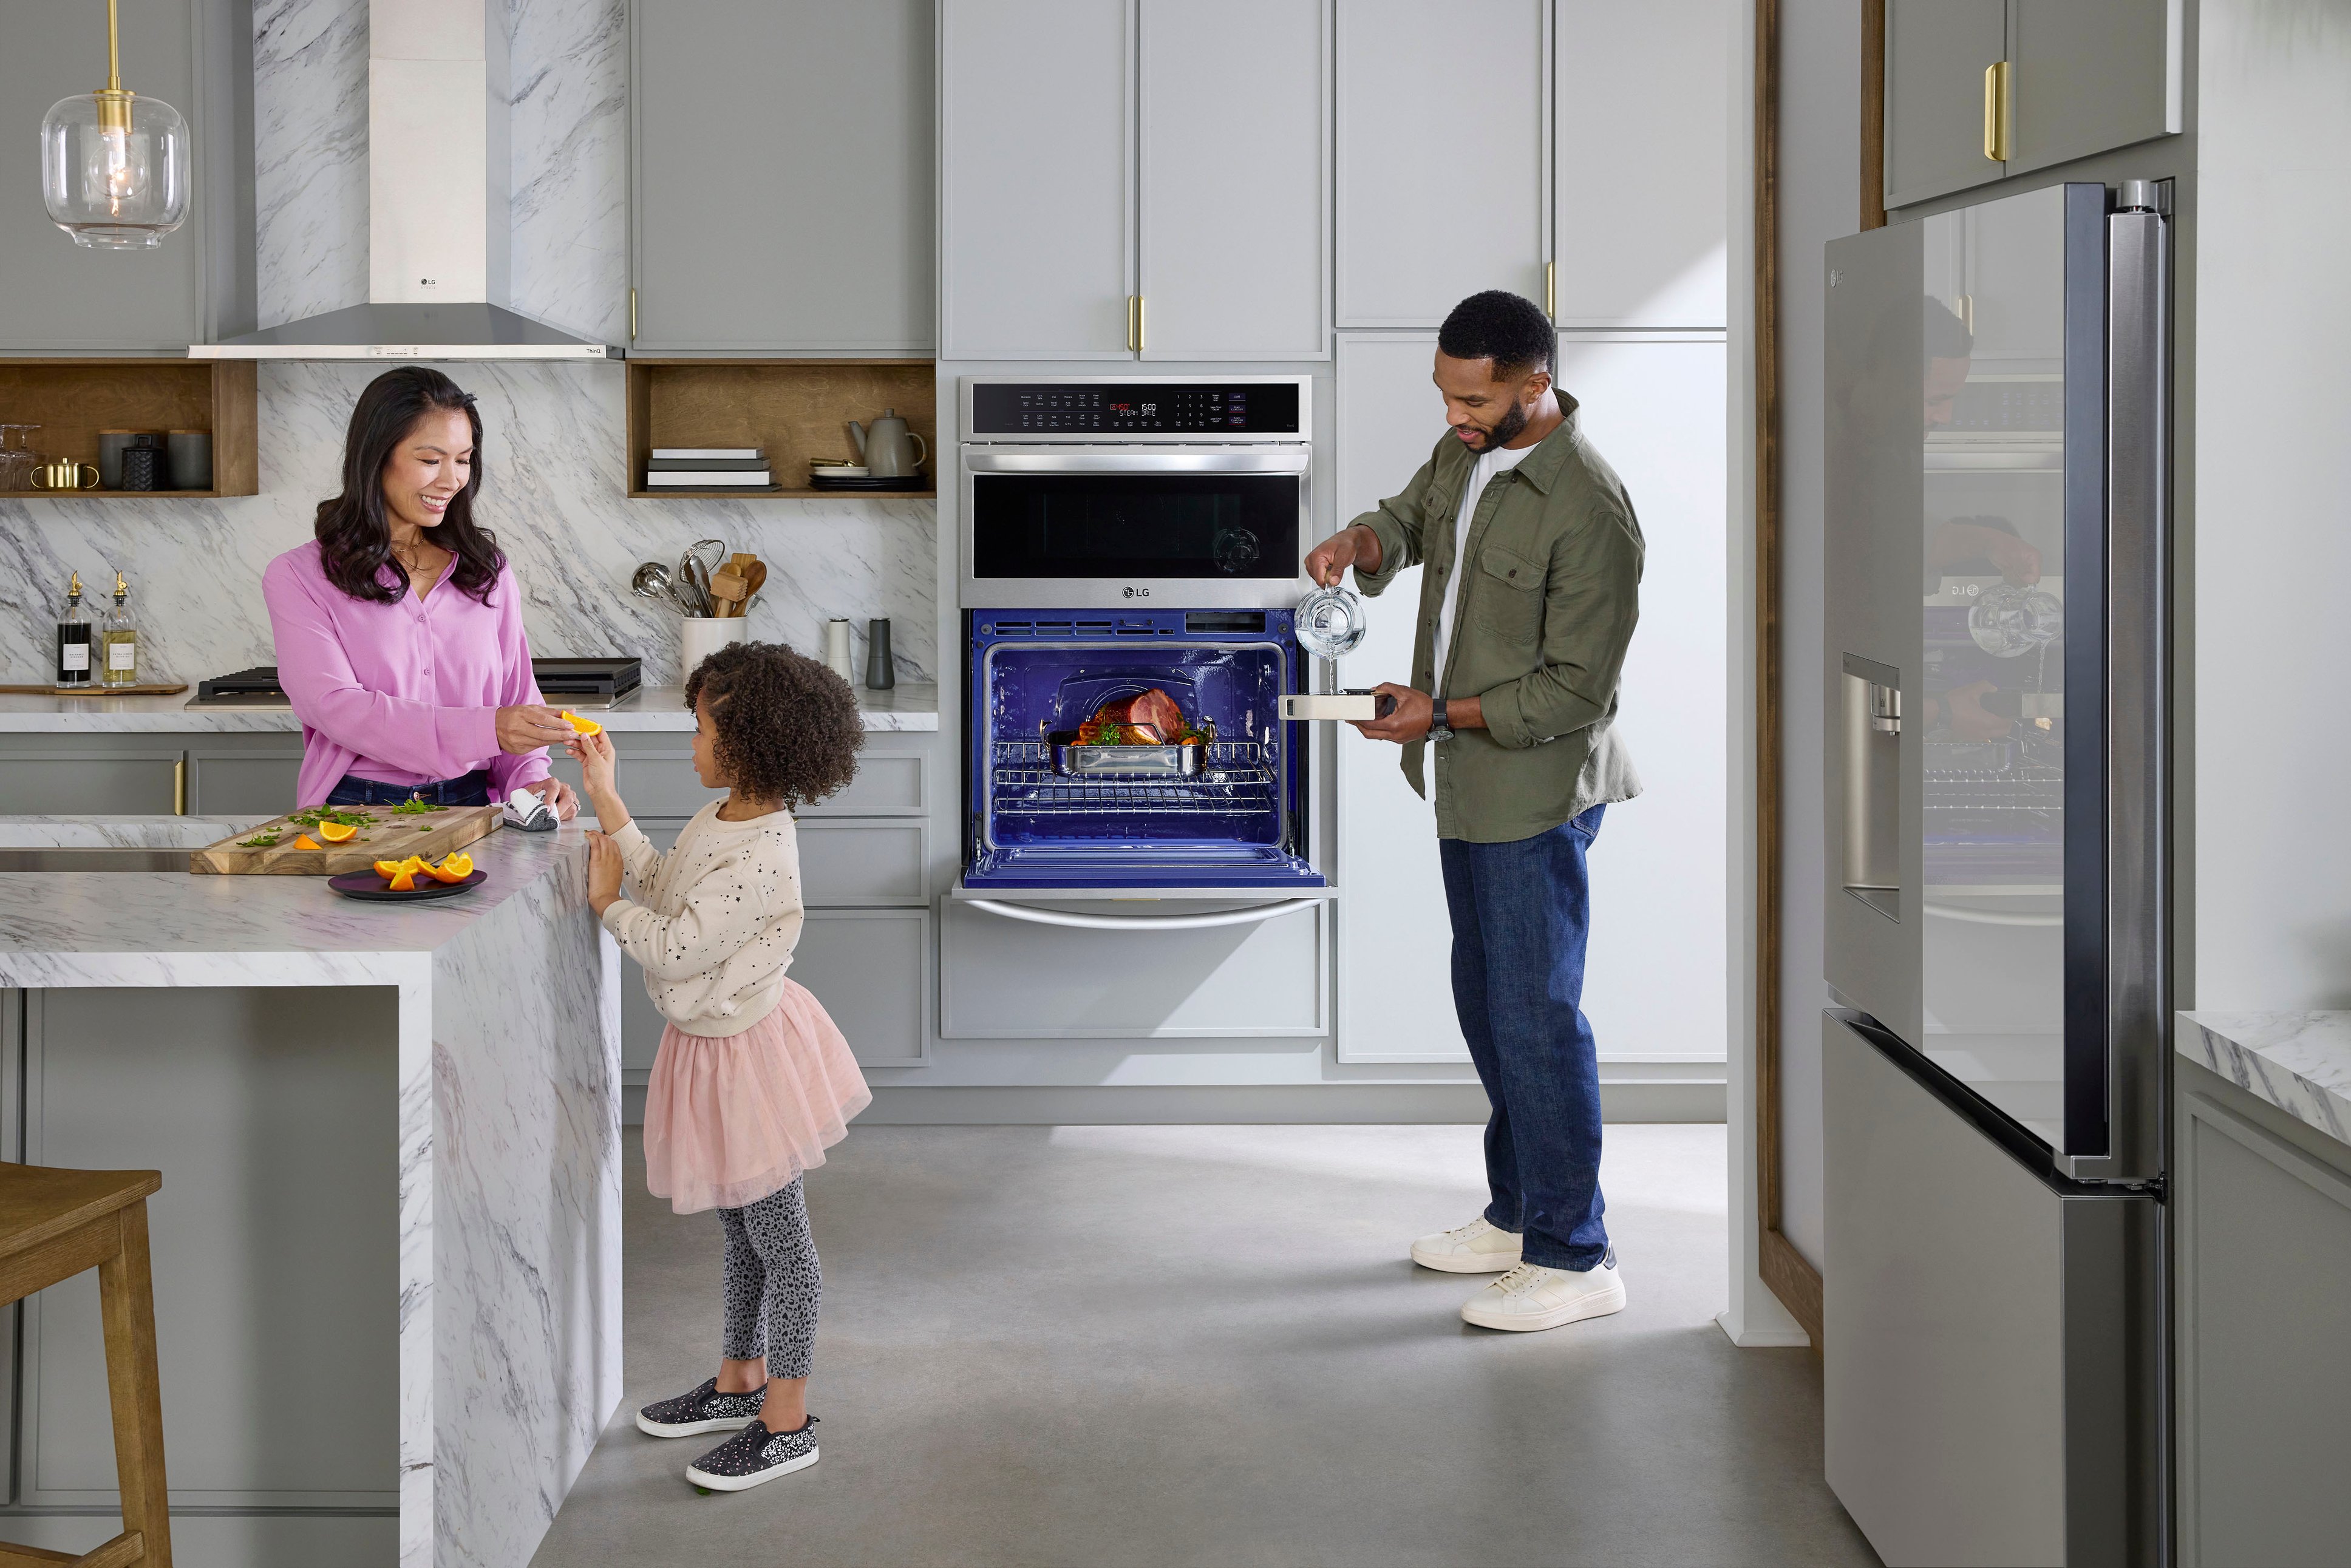 LG 30 Built-In Electric Convection Combination Wall Oven with Microwave  and Steam Sous Vide Stainless Steel WCEP6427F - Best Buy